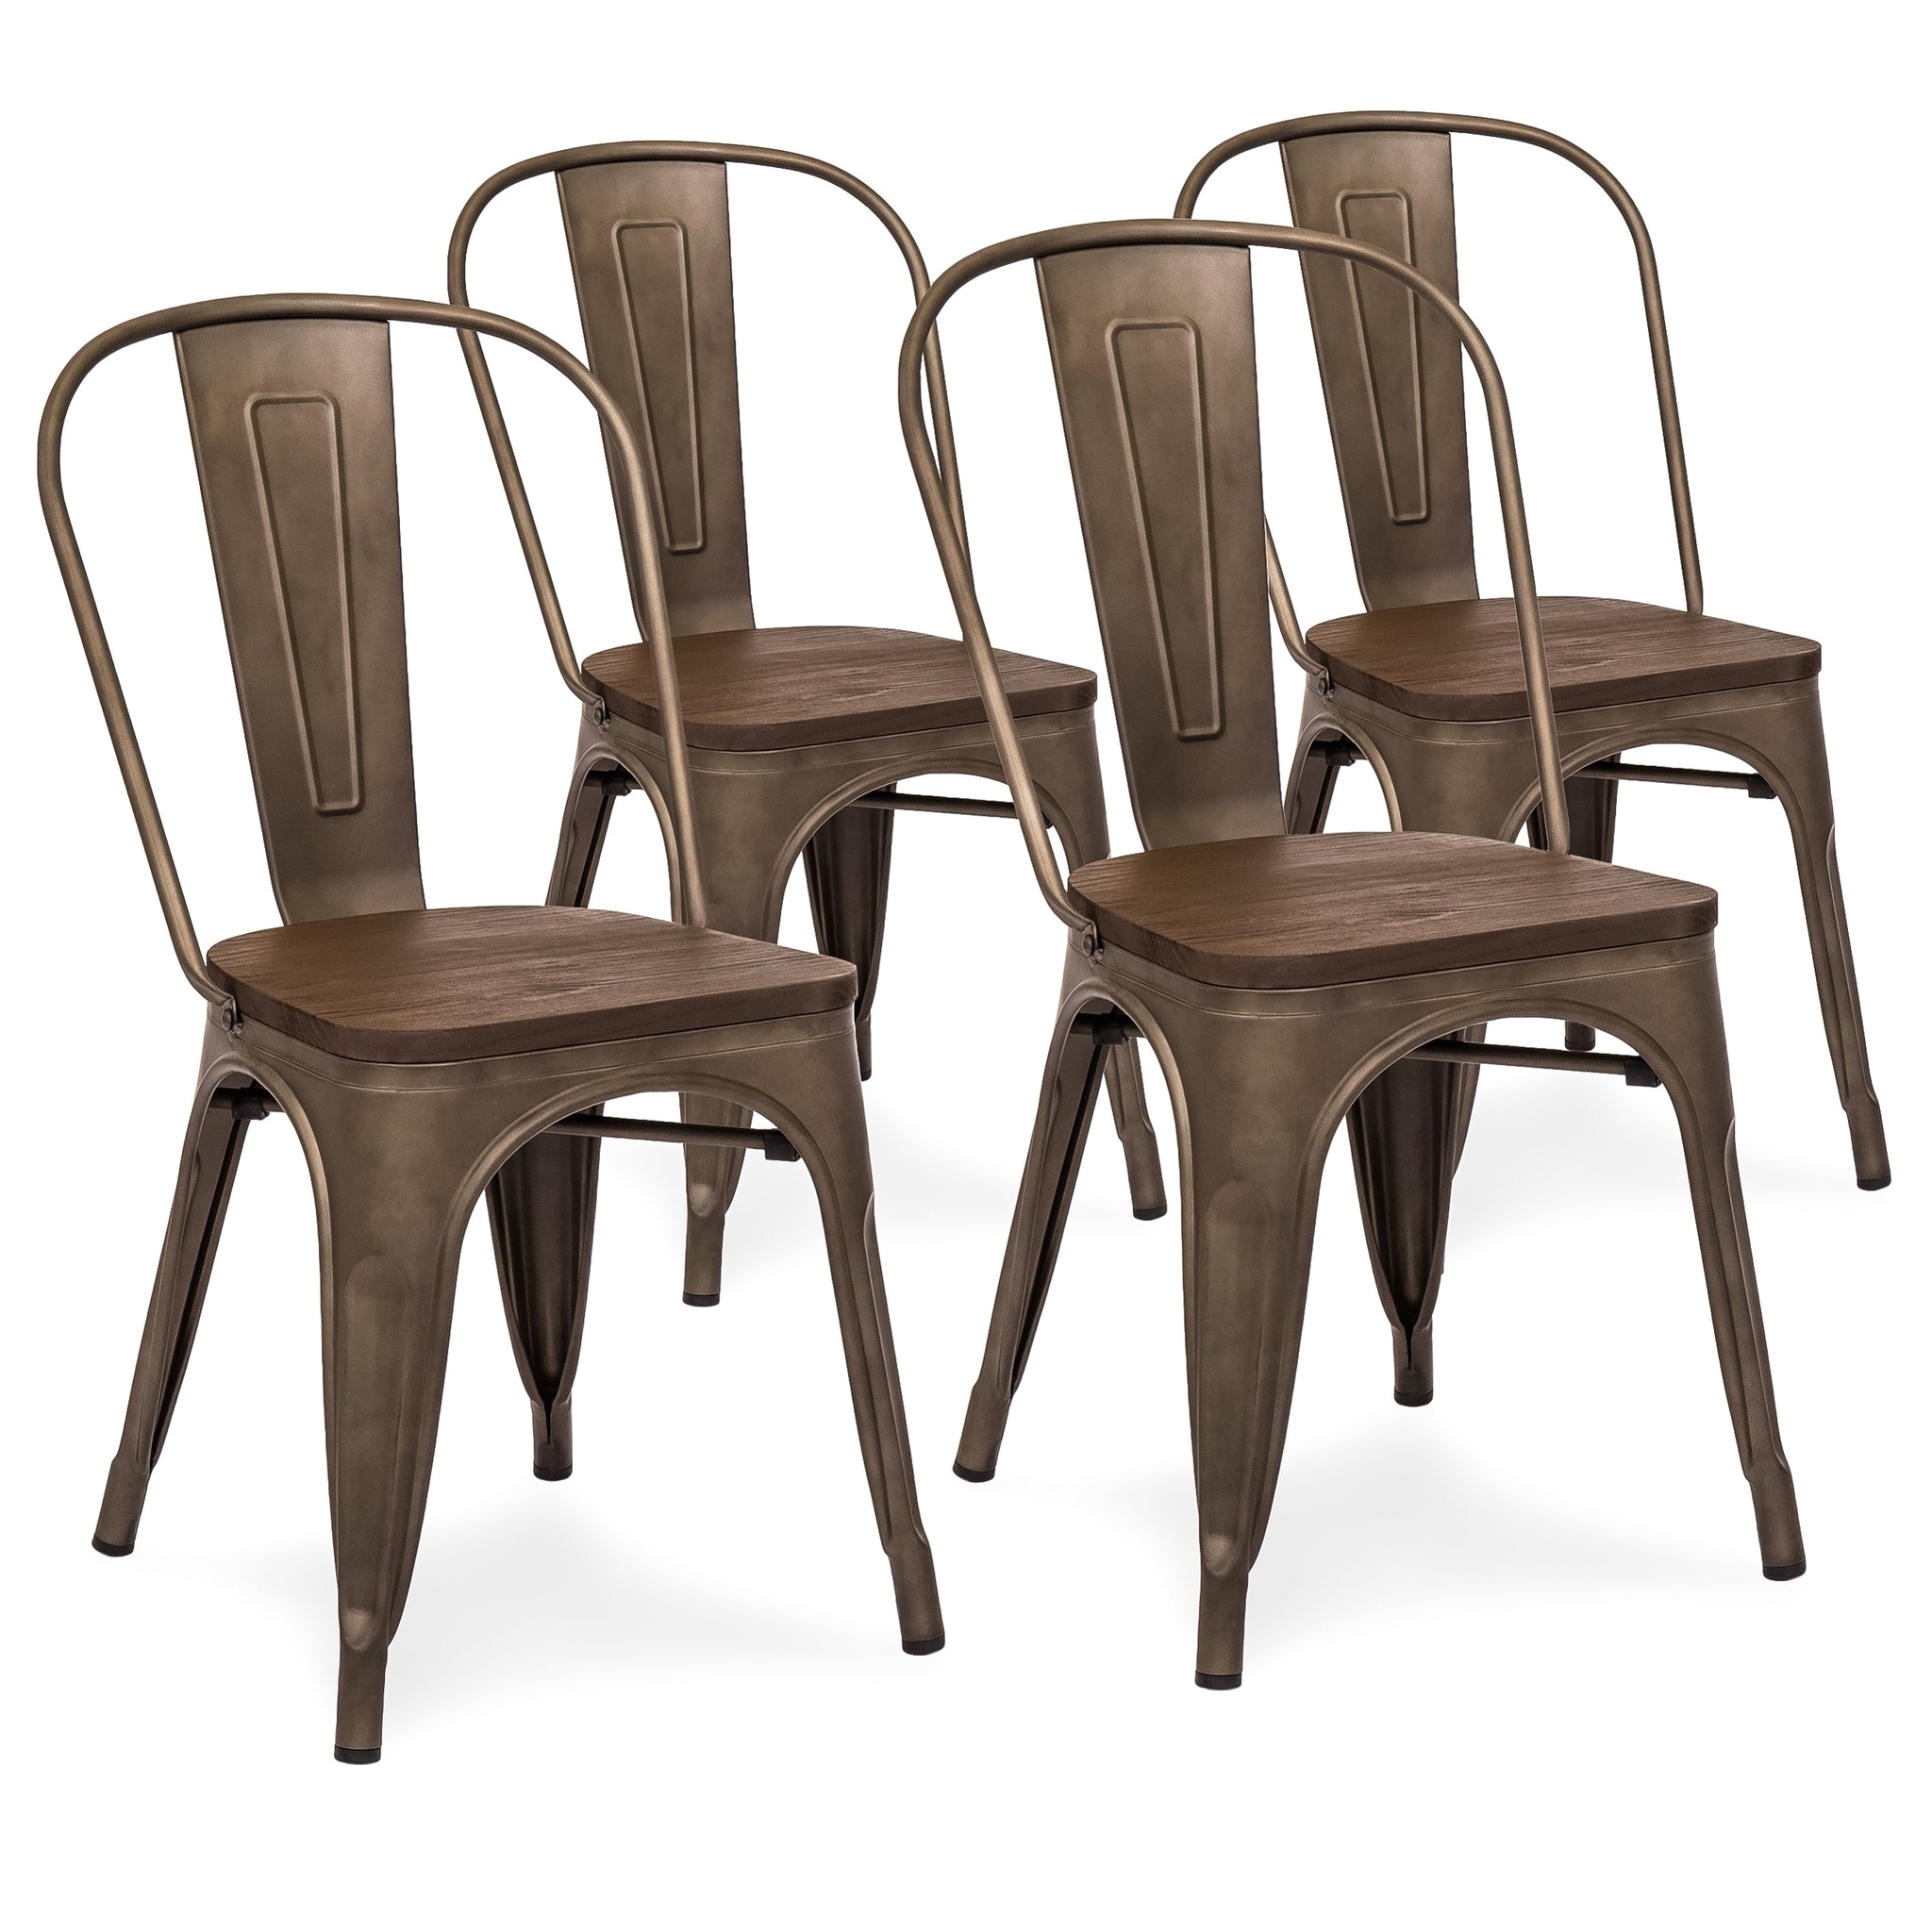 Bronze Metal Dining Chairs Chair Red Metal Dining Chairs Nice On Room together with Set Of